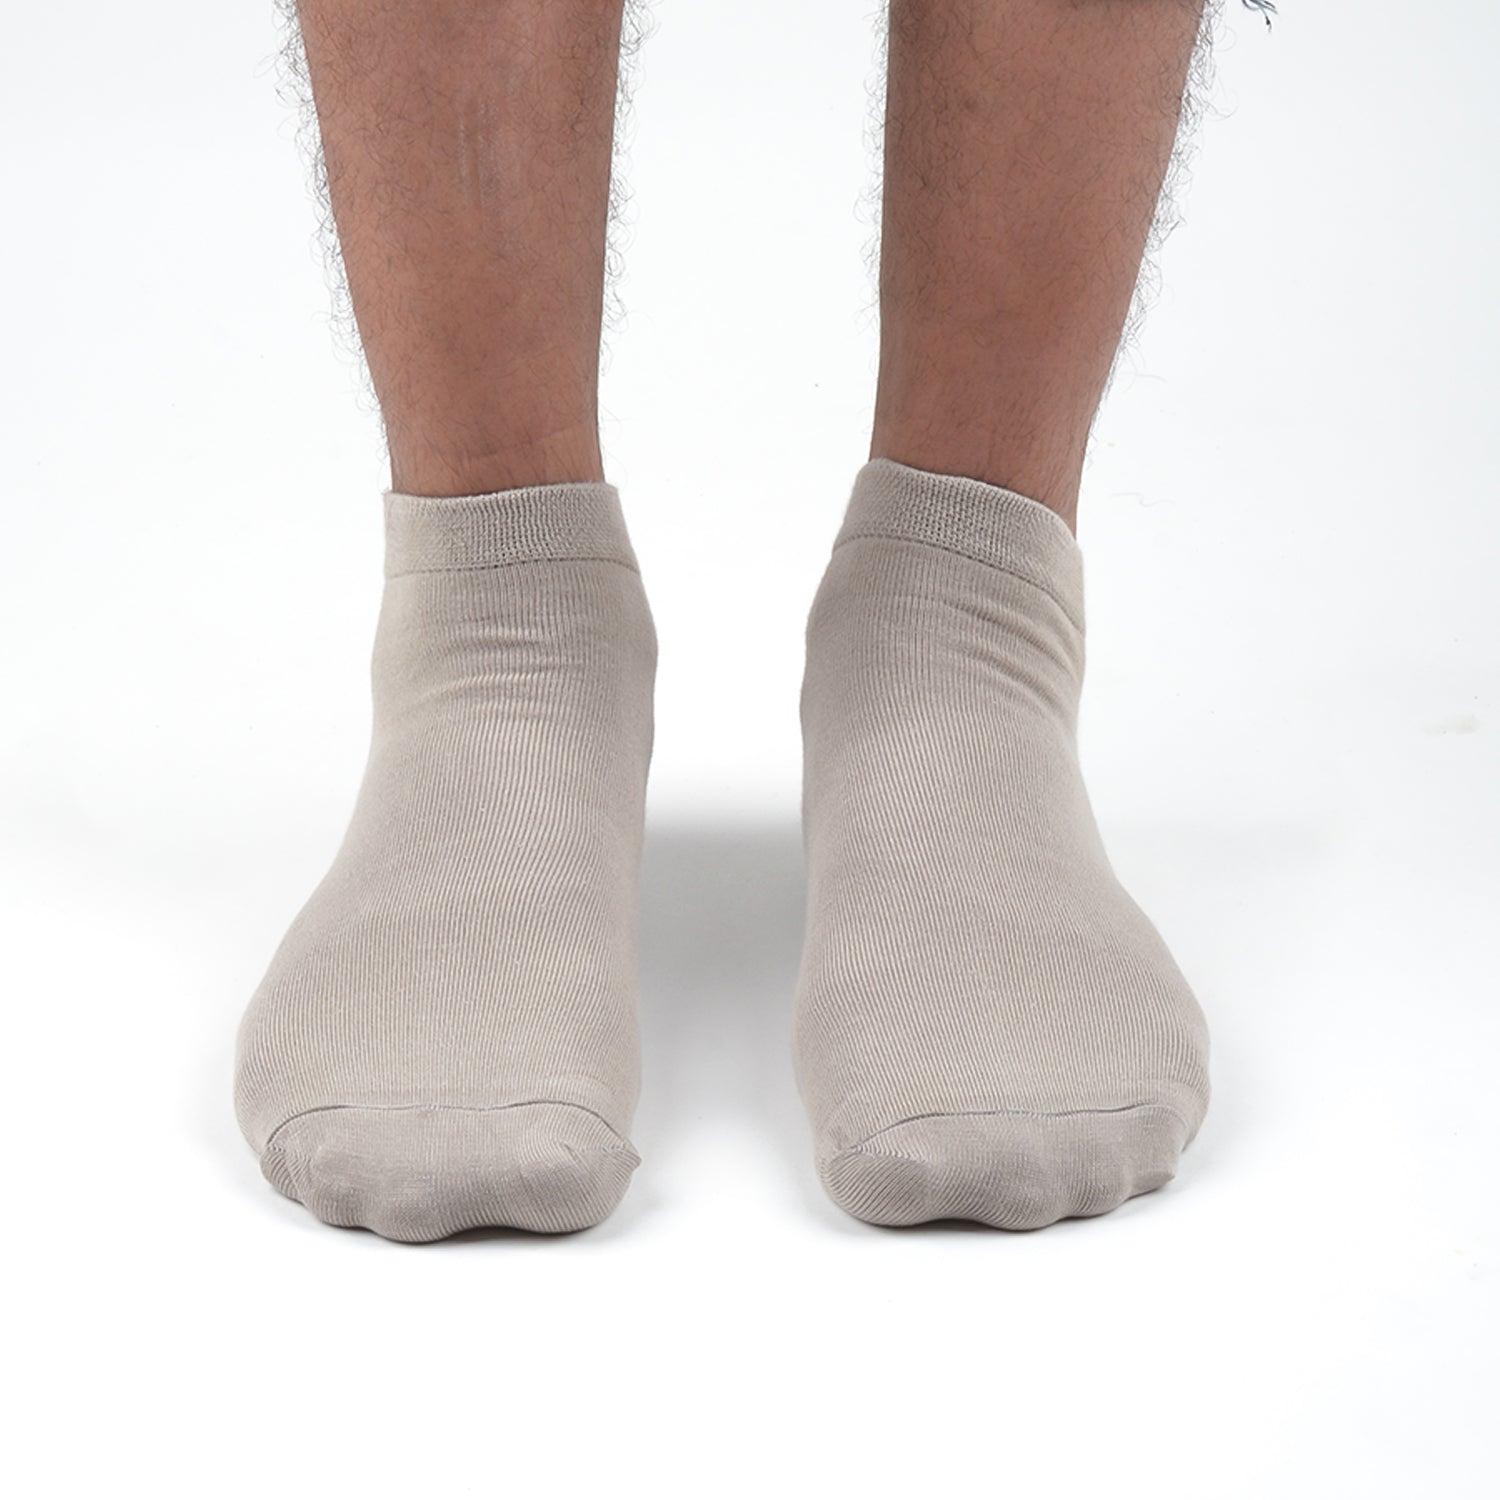 FOOTPRINTS Unisex Solid Cotton Ankle-Length Socks -Pack Of 1 Grey